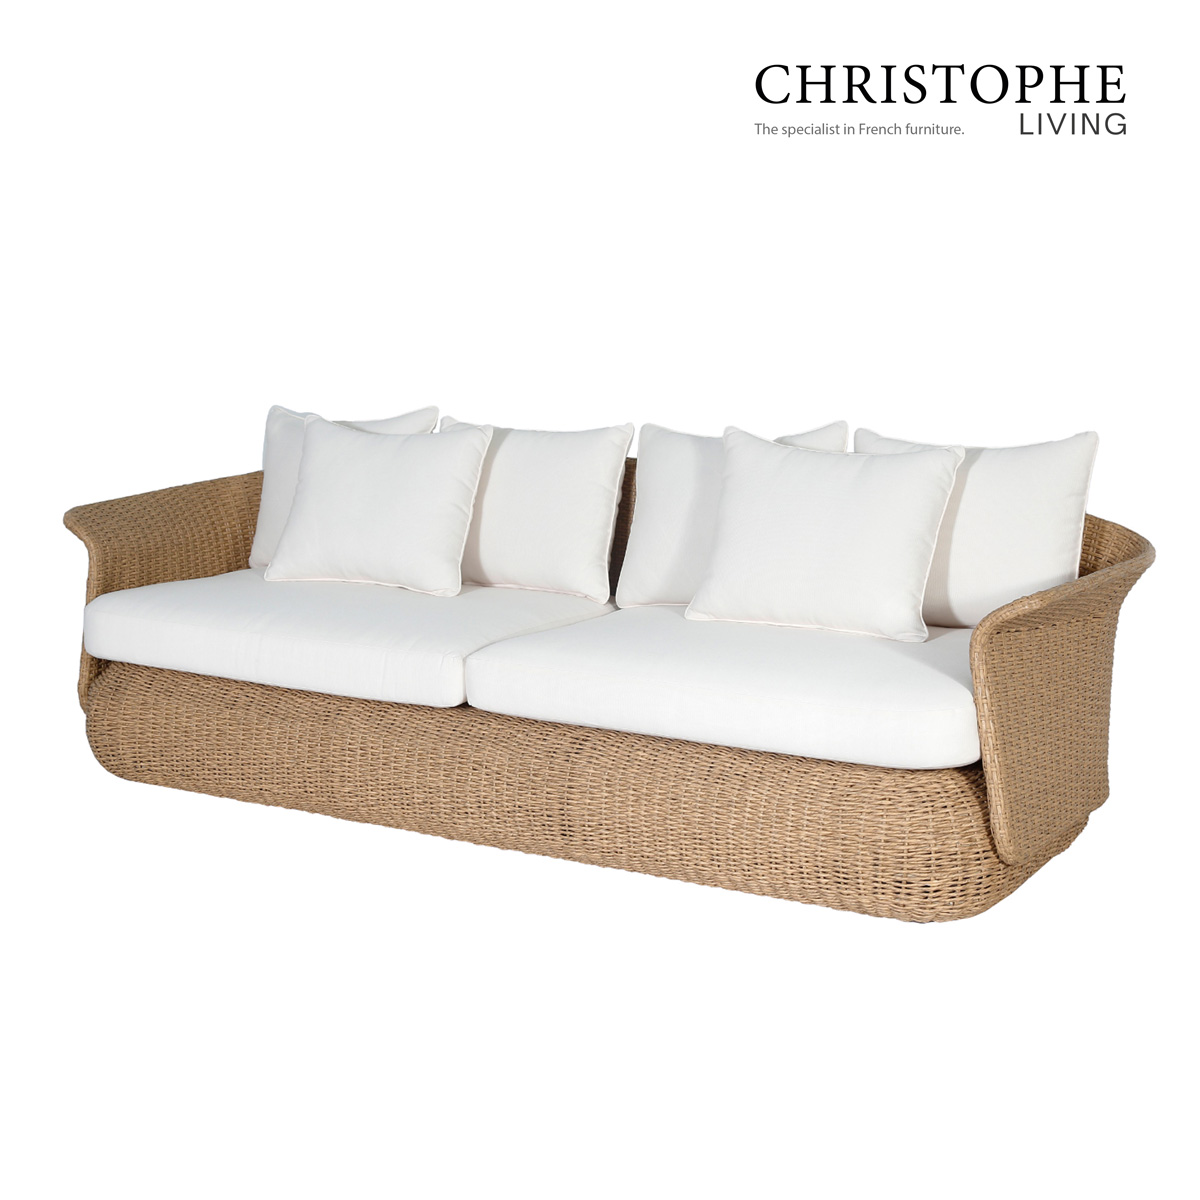 The Whitsundays Transitional Synthetic Rattan 3 Seater Sofa in Natural Wicker Finish for Outdoor Patio